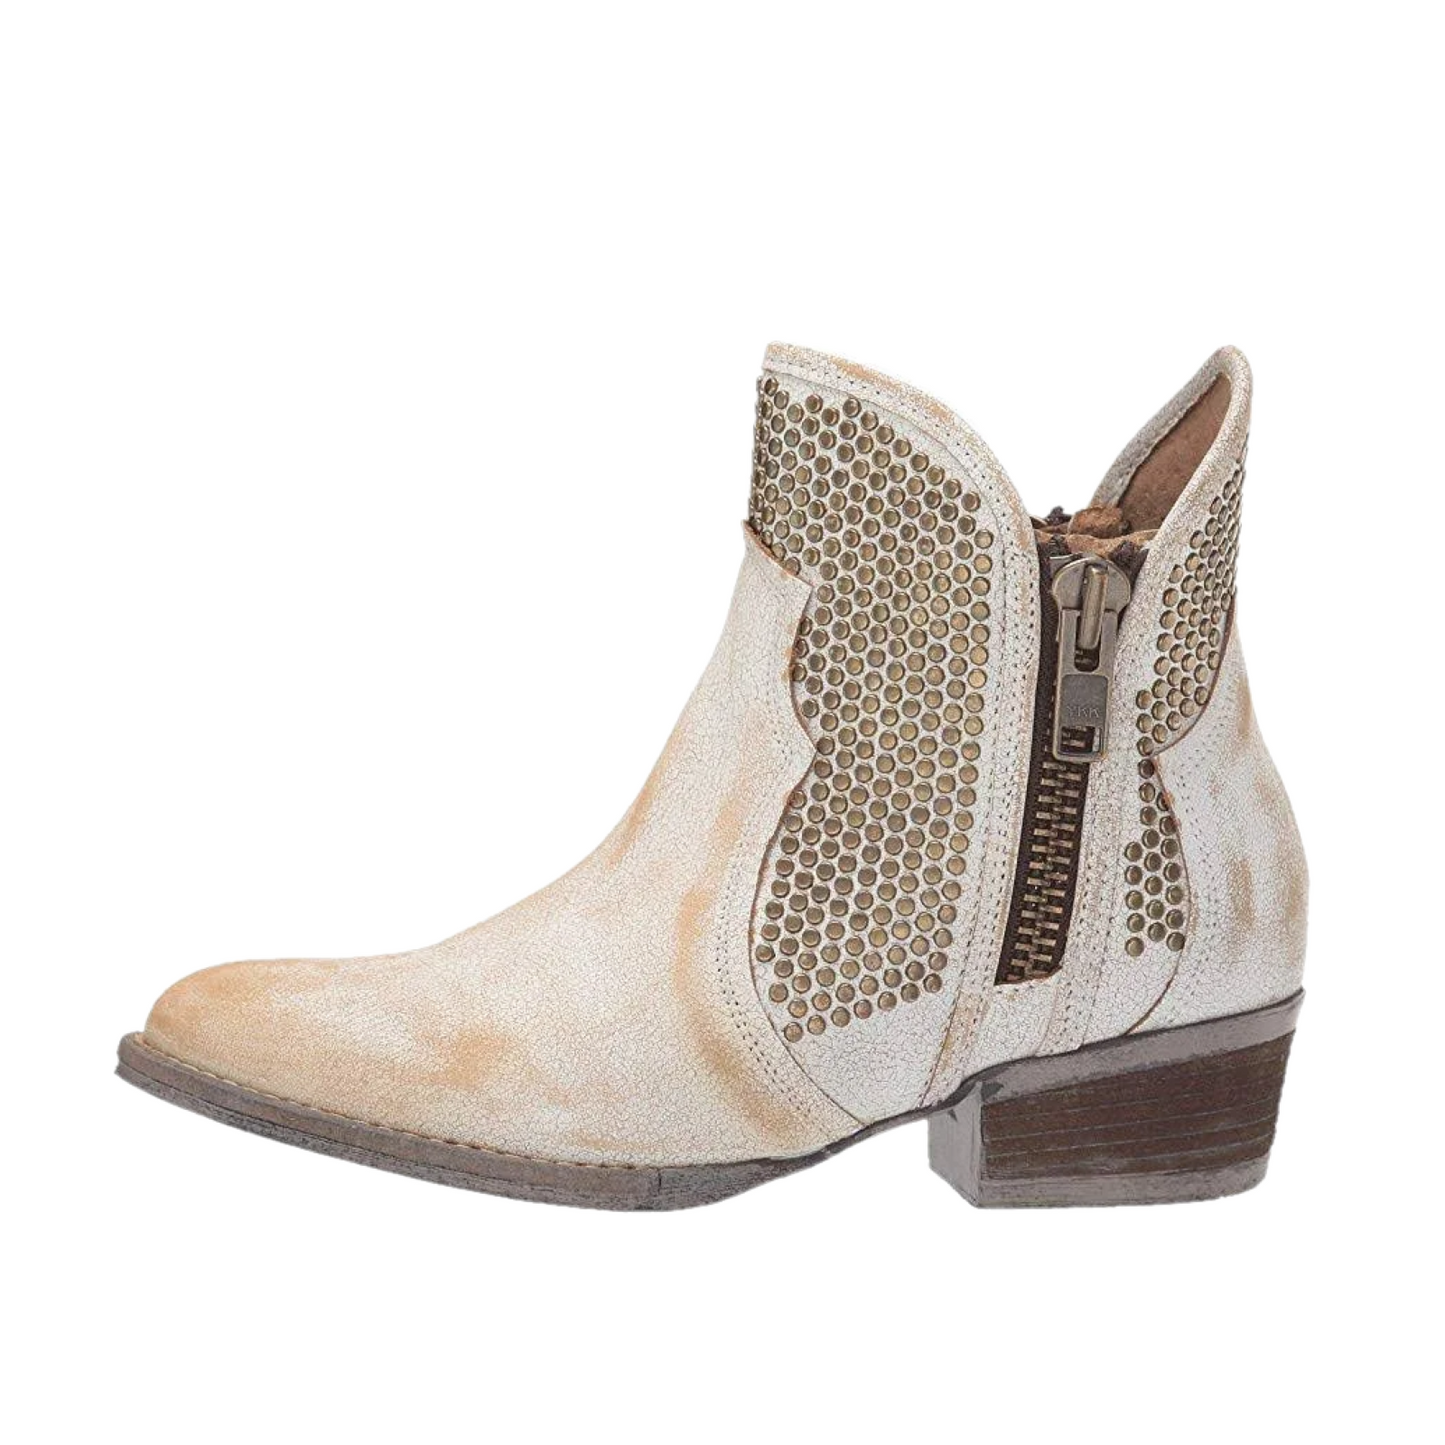 Circle G By Corral Ladies Camel White Studs Shortie Ankle Boots Q0126